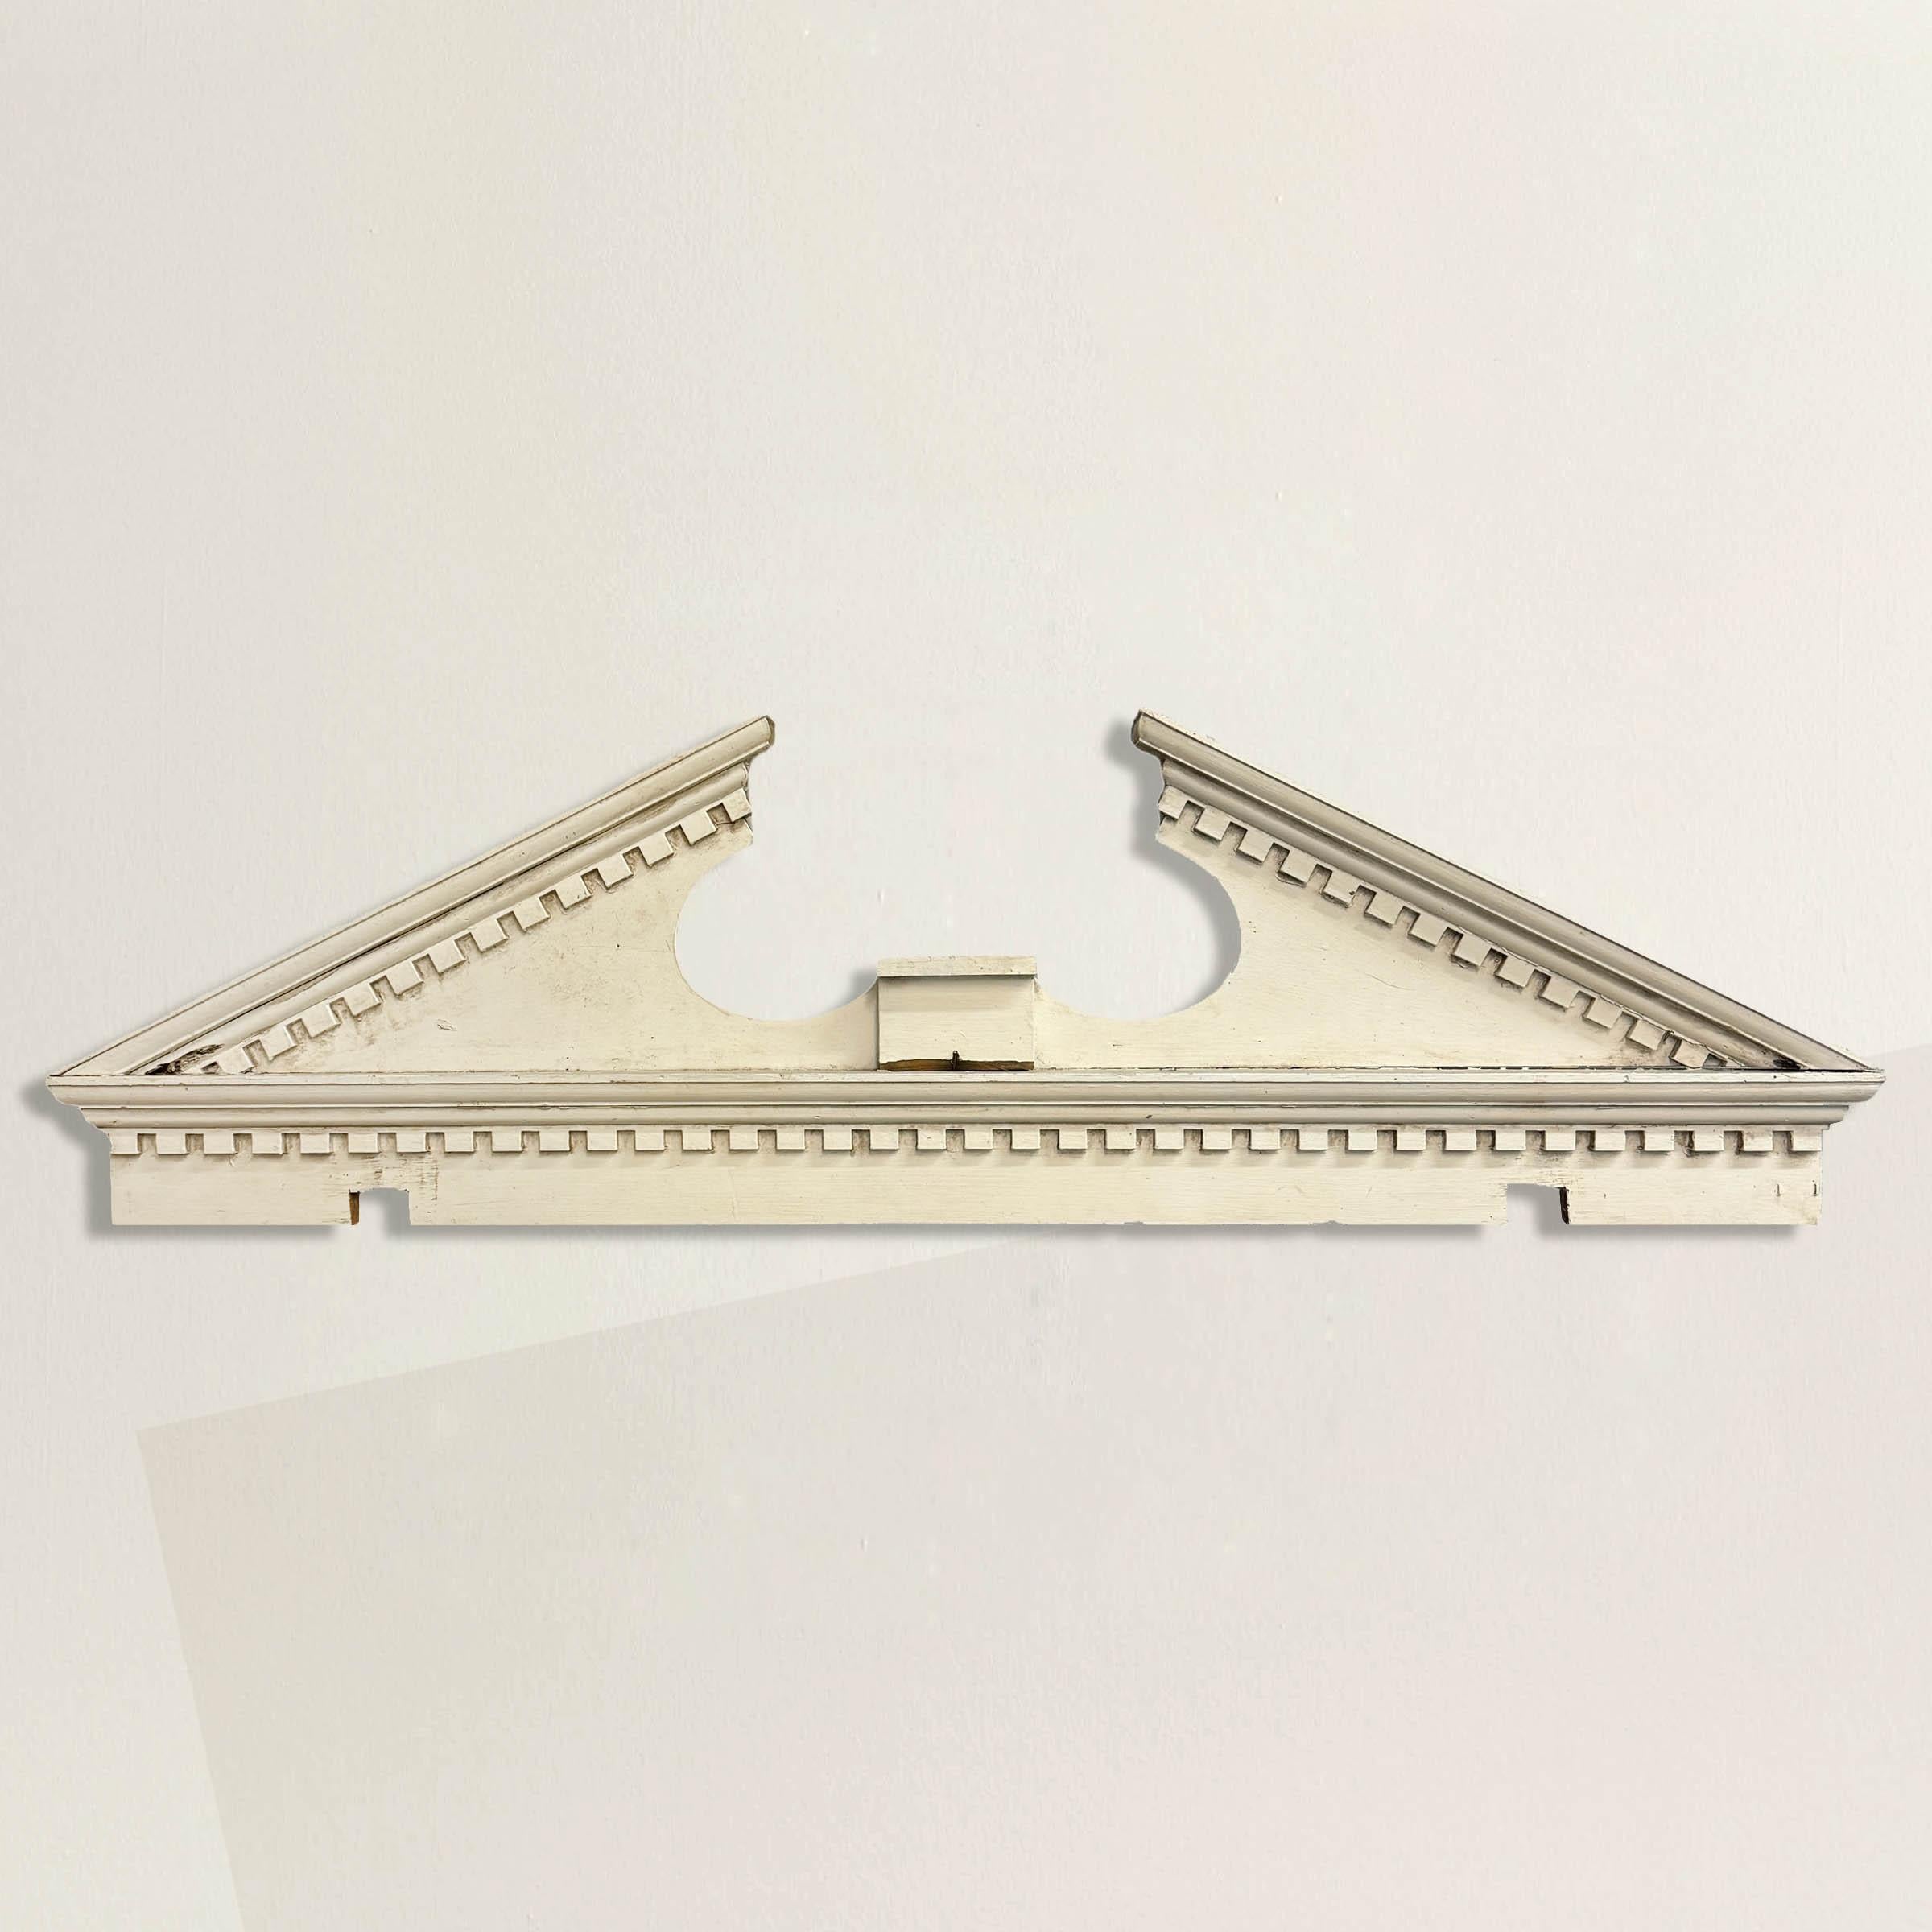 Crafted with meticulous attention to detail, this exquisite 19th-century American Greek Revival broken pediment is a classical architectural masterpiece featuring intricate dentil molding and is painted in timeless white, adding a touch of